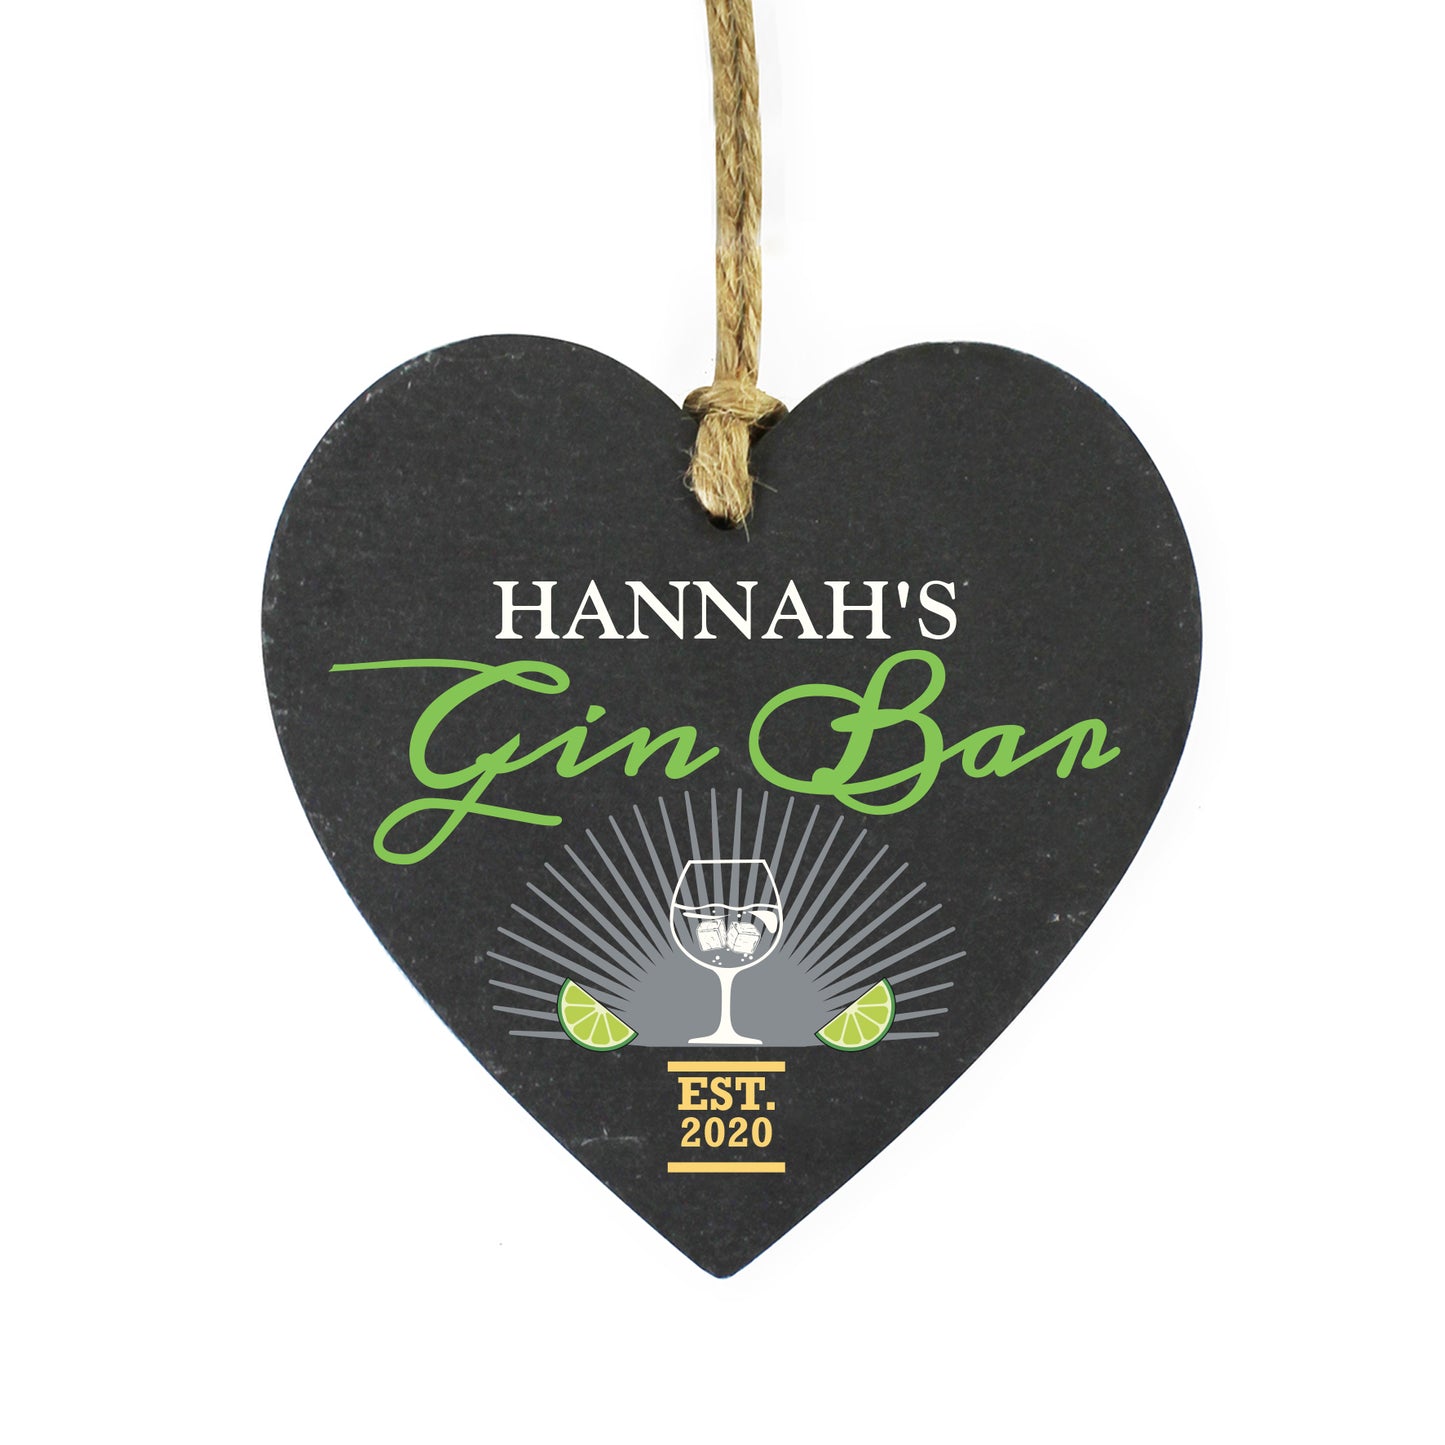 Personalised Gin Bar Slate Heart Decoration - Personalise It!